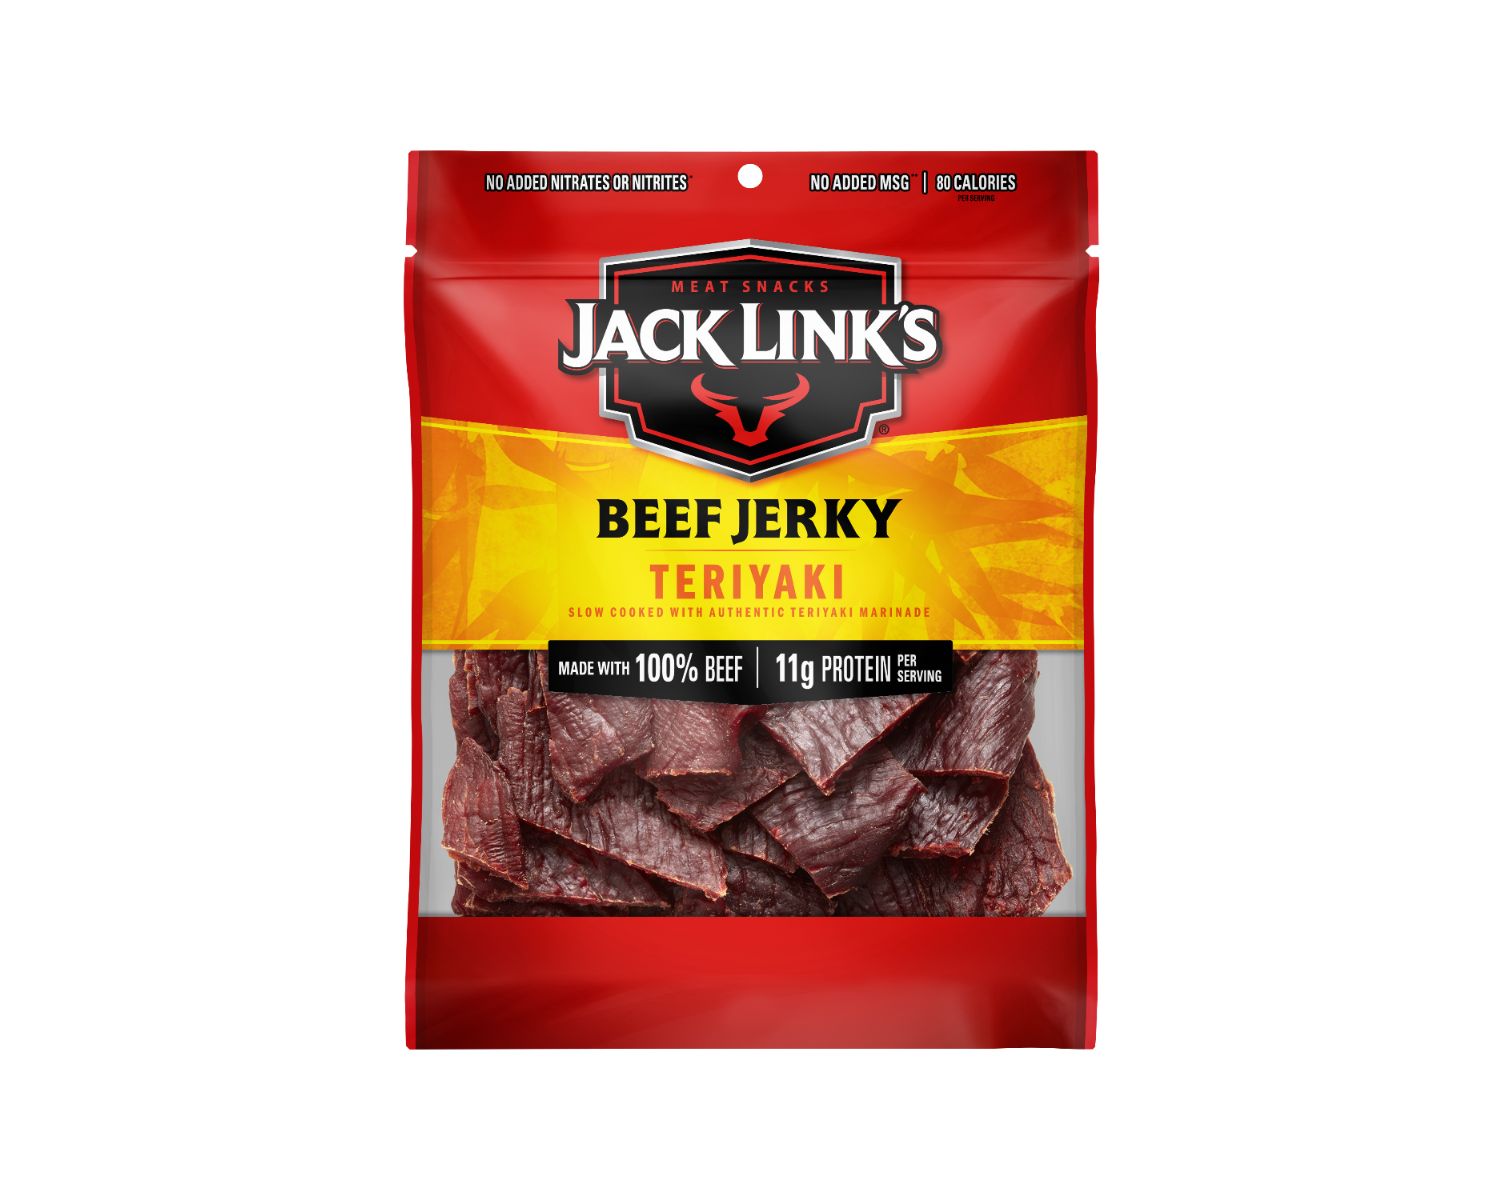 11-jack-links-nutrition-facts